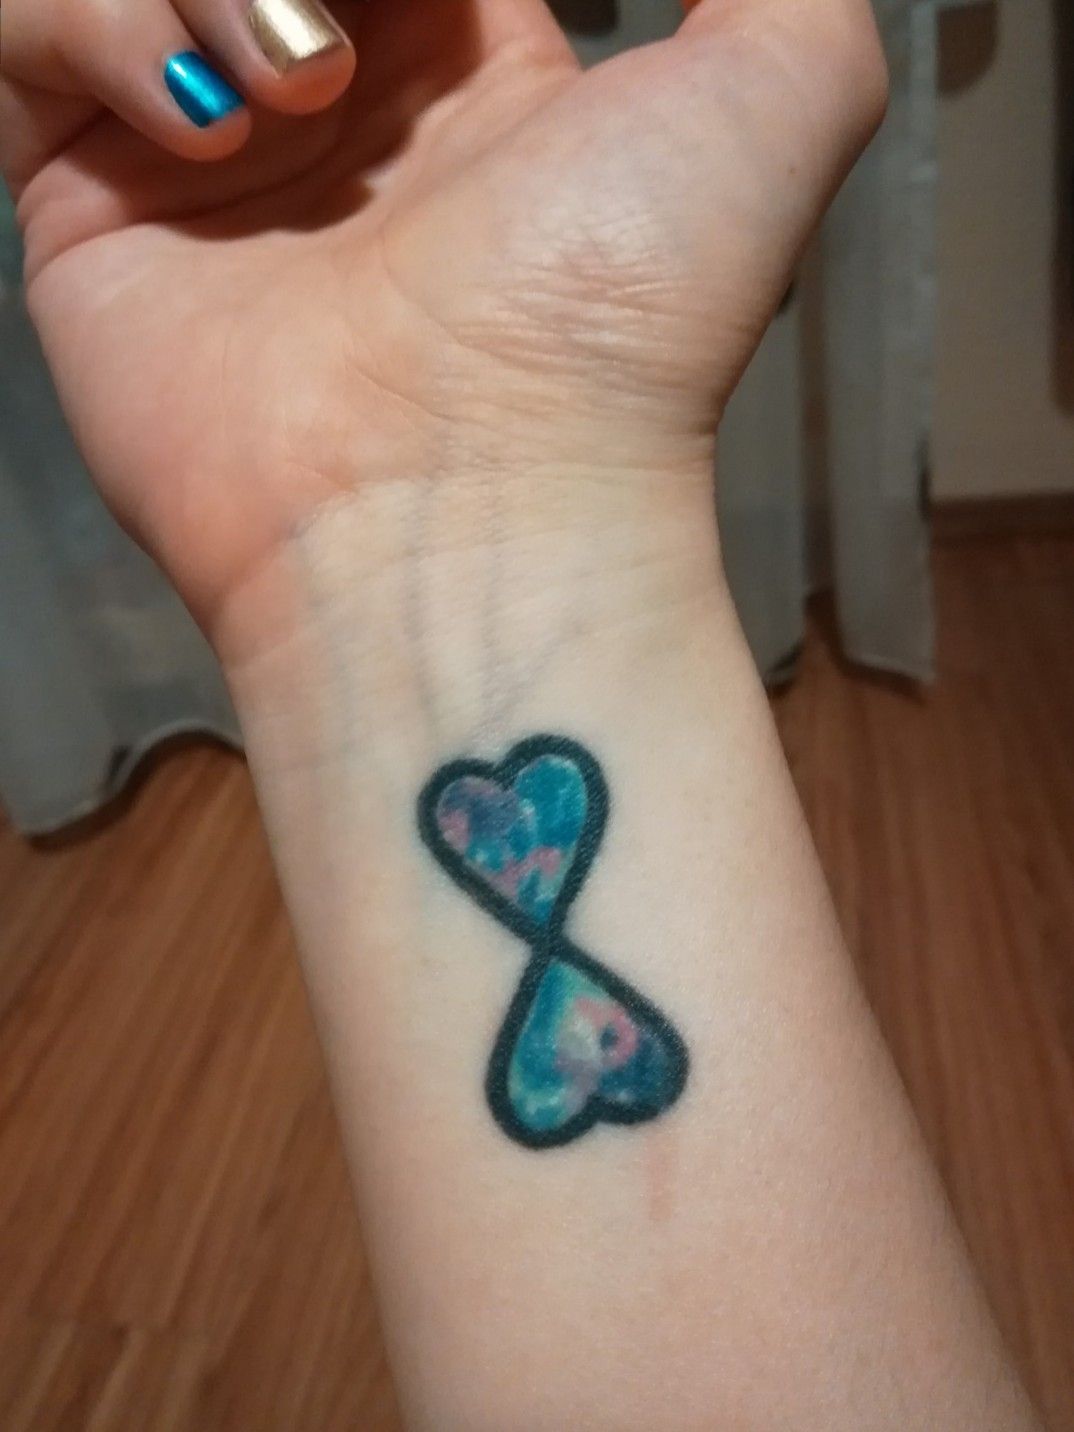 Two weeks after getting diagnosed with Autism I got my first tattoo at age  35 Went for the infinity symbol  rautism